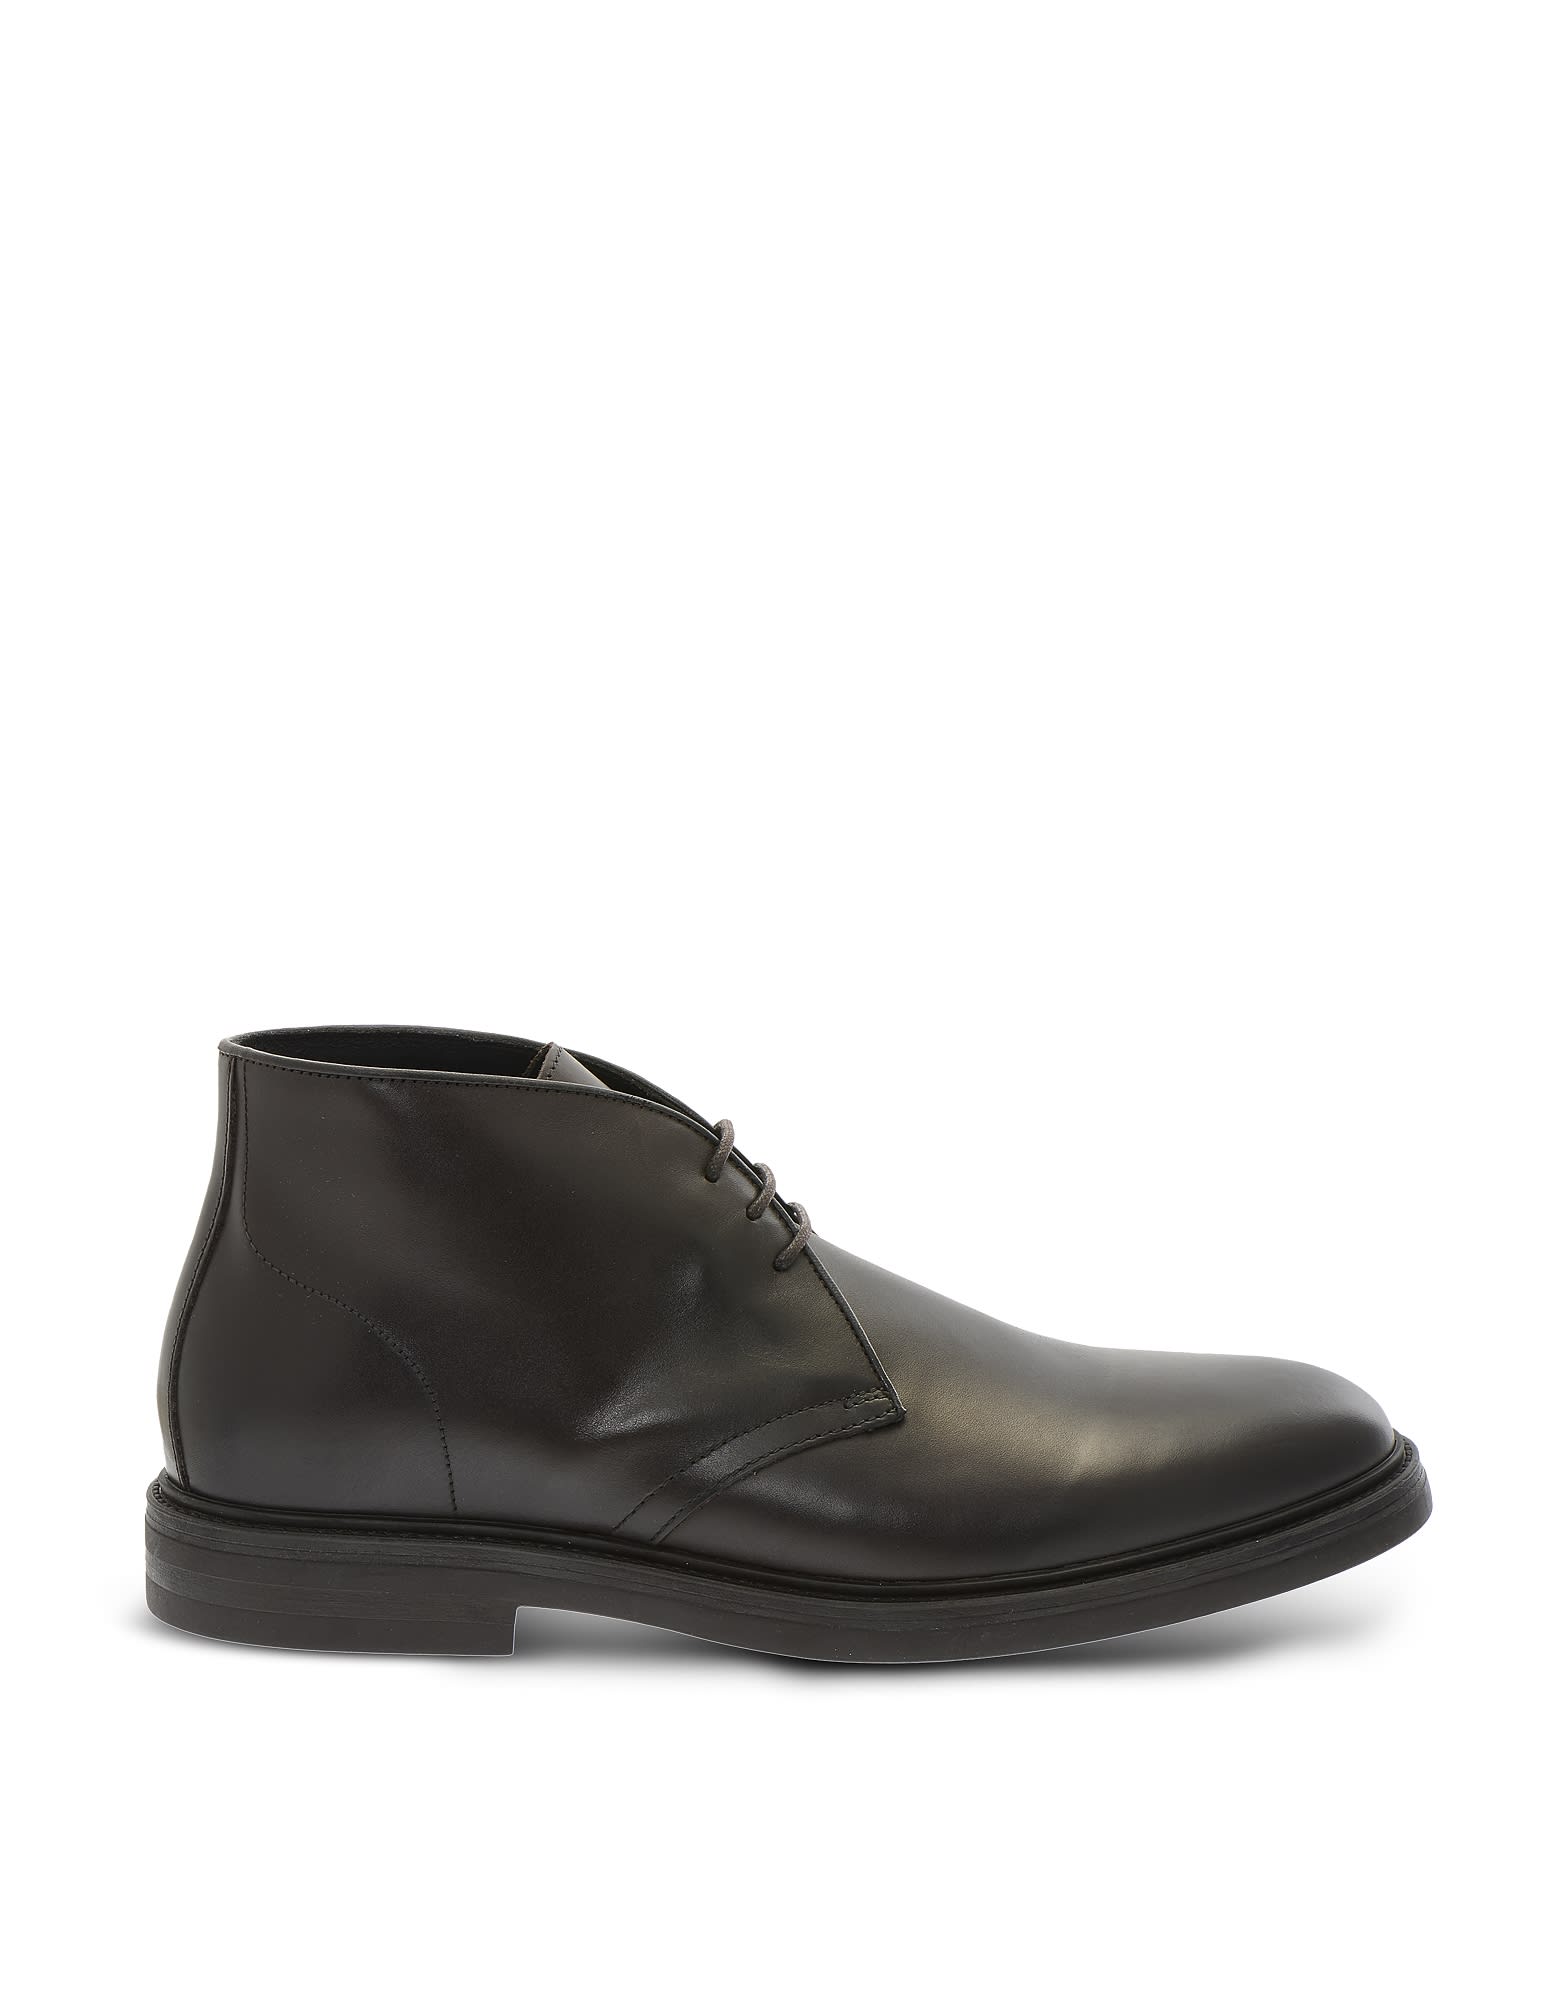 A.testoni Leather Mens Ankle Boots